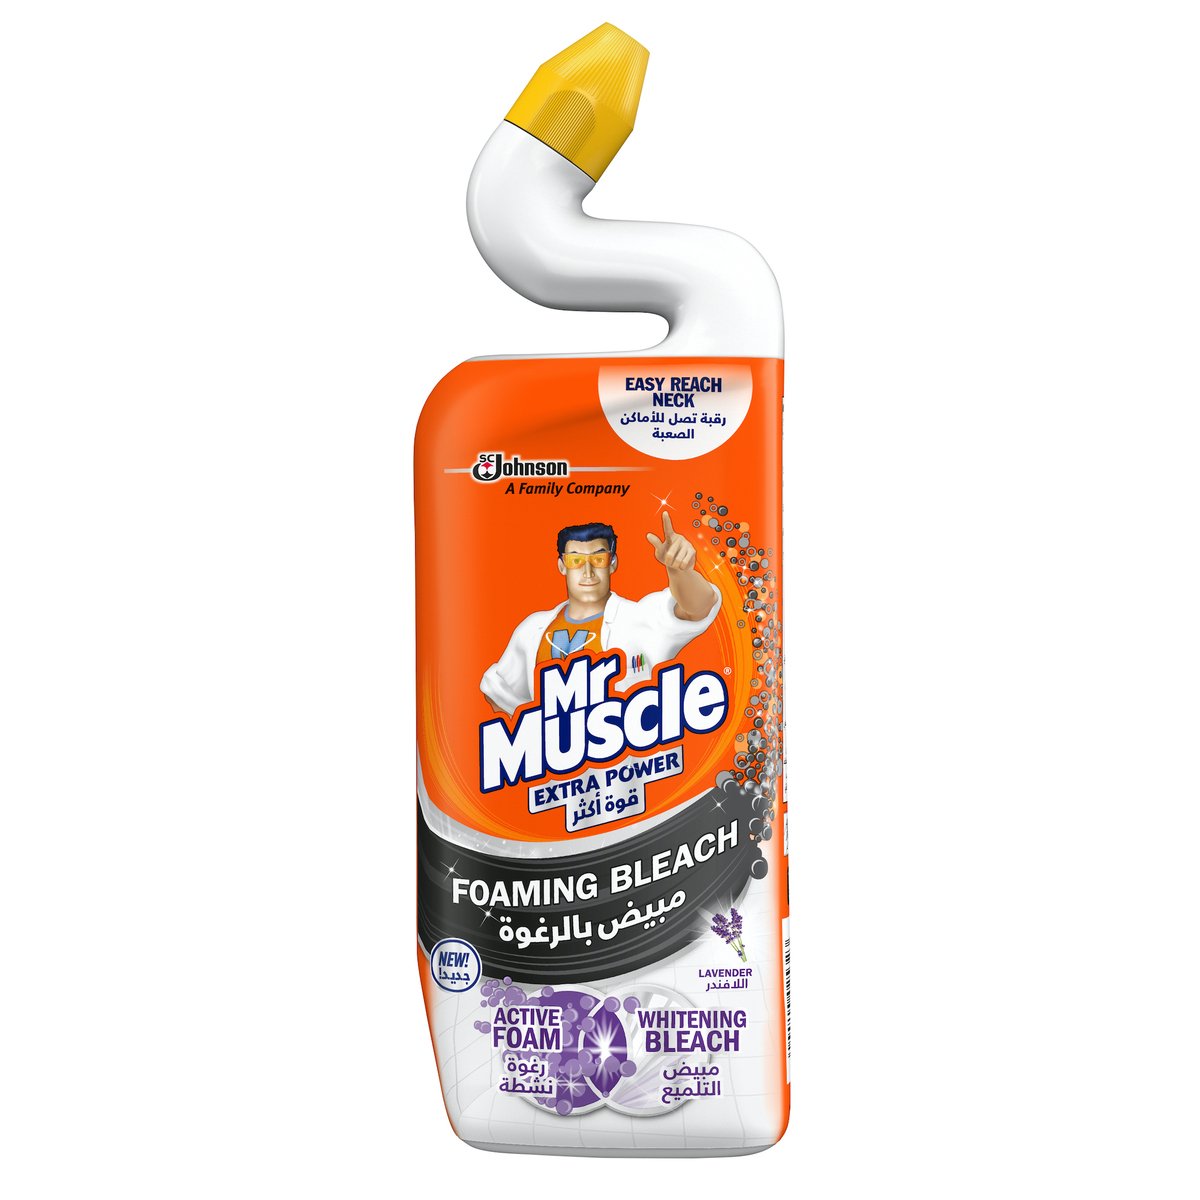 Mr. Muscle Extra Power Foaming Bleach Lavender, 750 ml